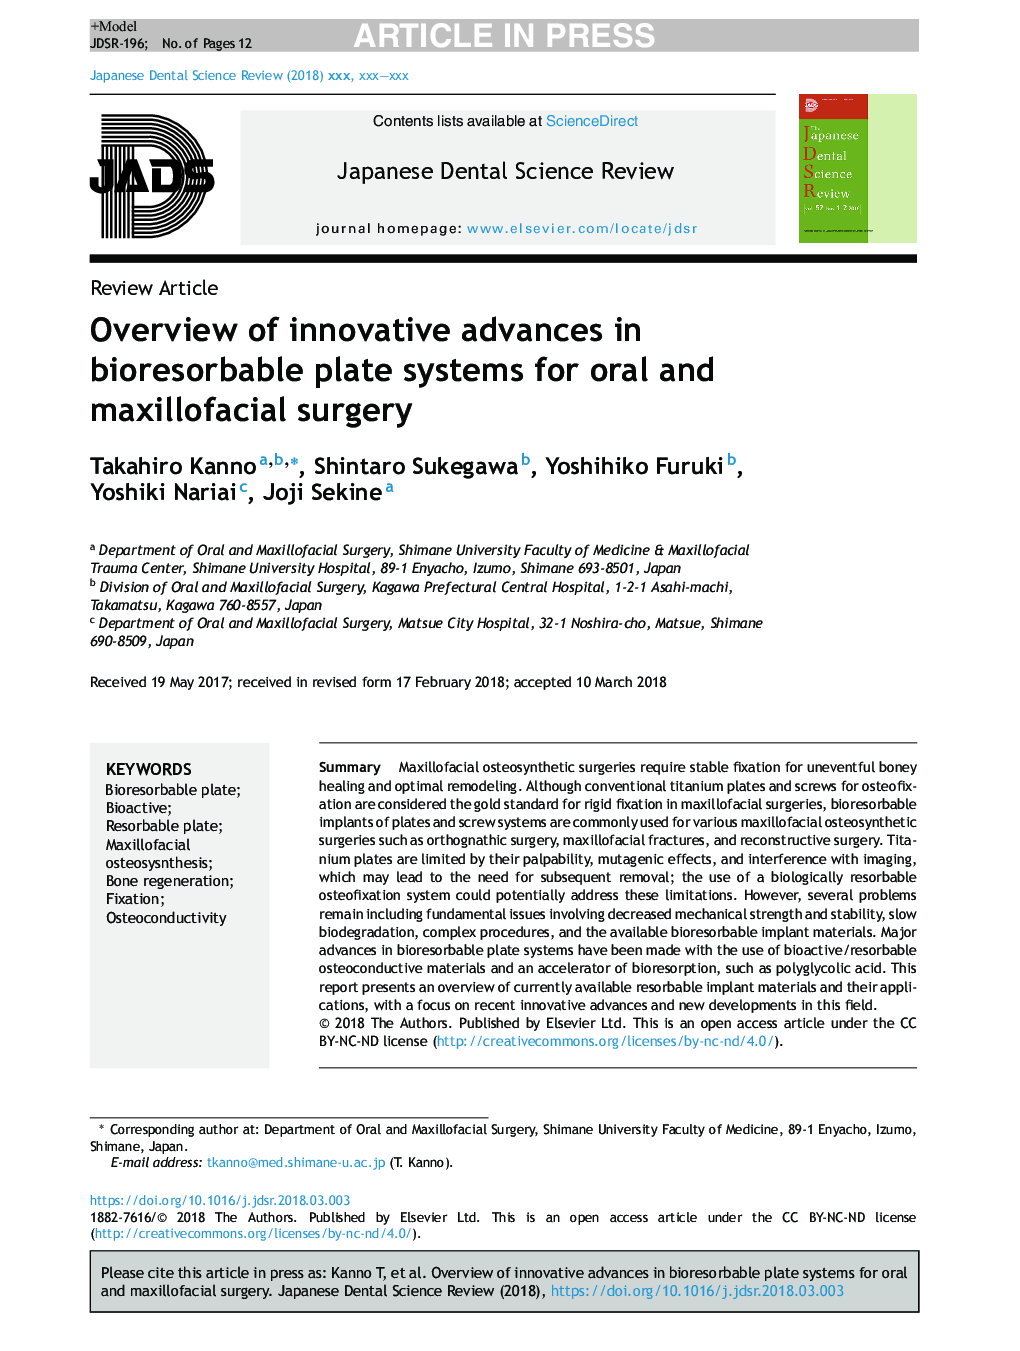 Overview of innovative advances in bioresorbable plate systems for oral and maxillofacial surgery